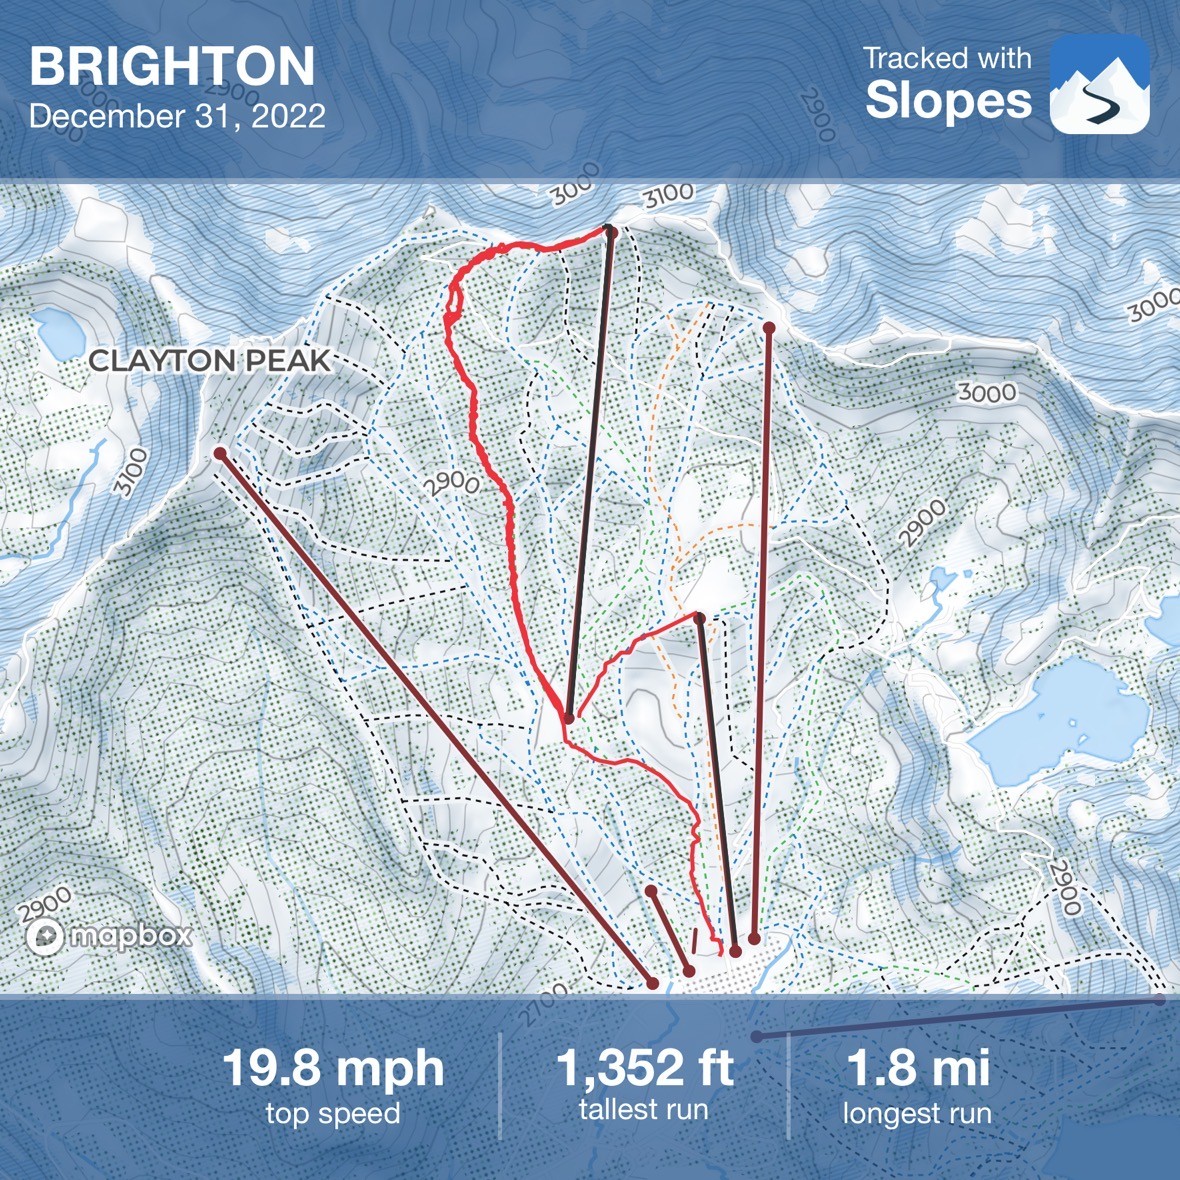 Map depicting Brighton resort’s trails and lifts, showing the routes taken on December 31, 2022 as tracked by Slopes app. Captioned with top stats in three categories: 19.8 miles per hour top speed, 1,352 feet tallest run, and 1.8 mile longest run.